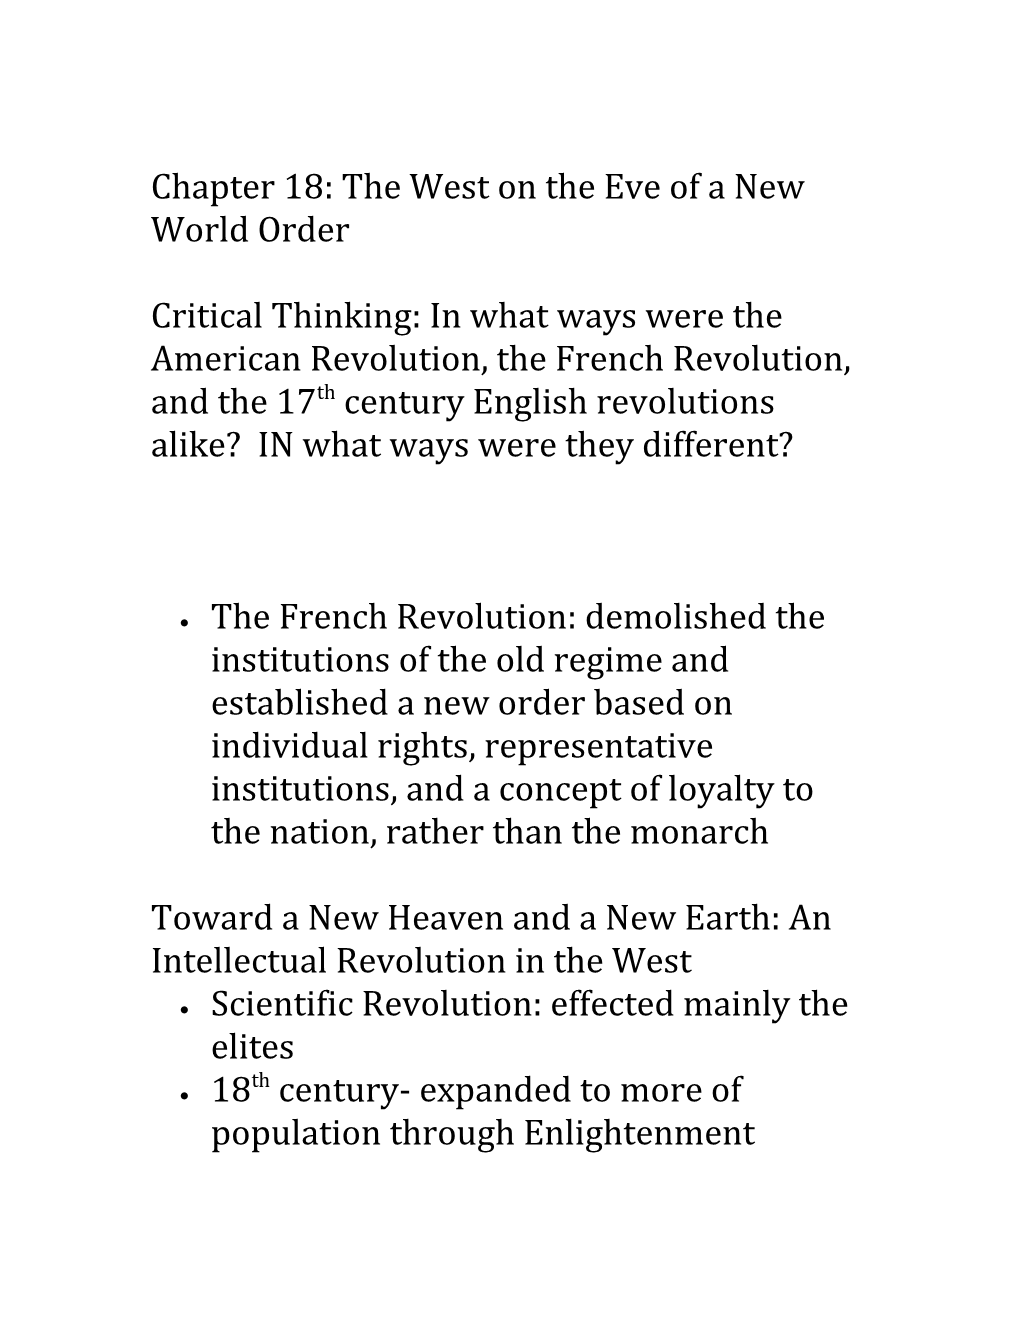 Chapter 18: the West on the Eve of a New World Order